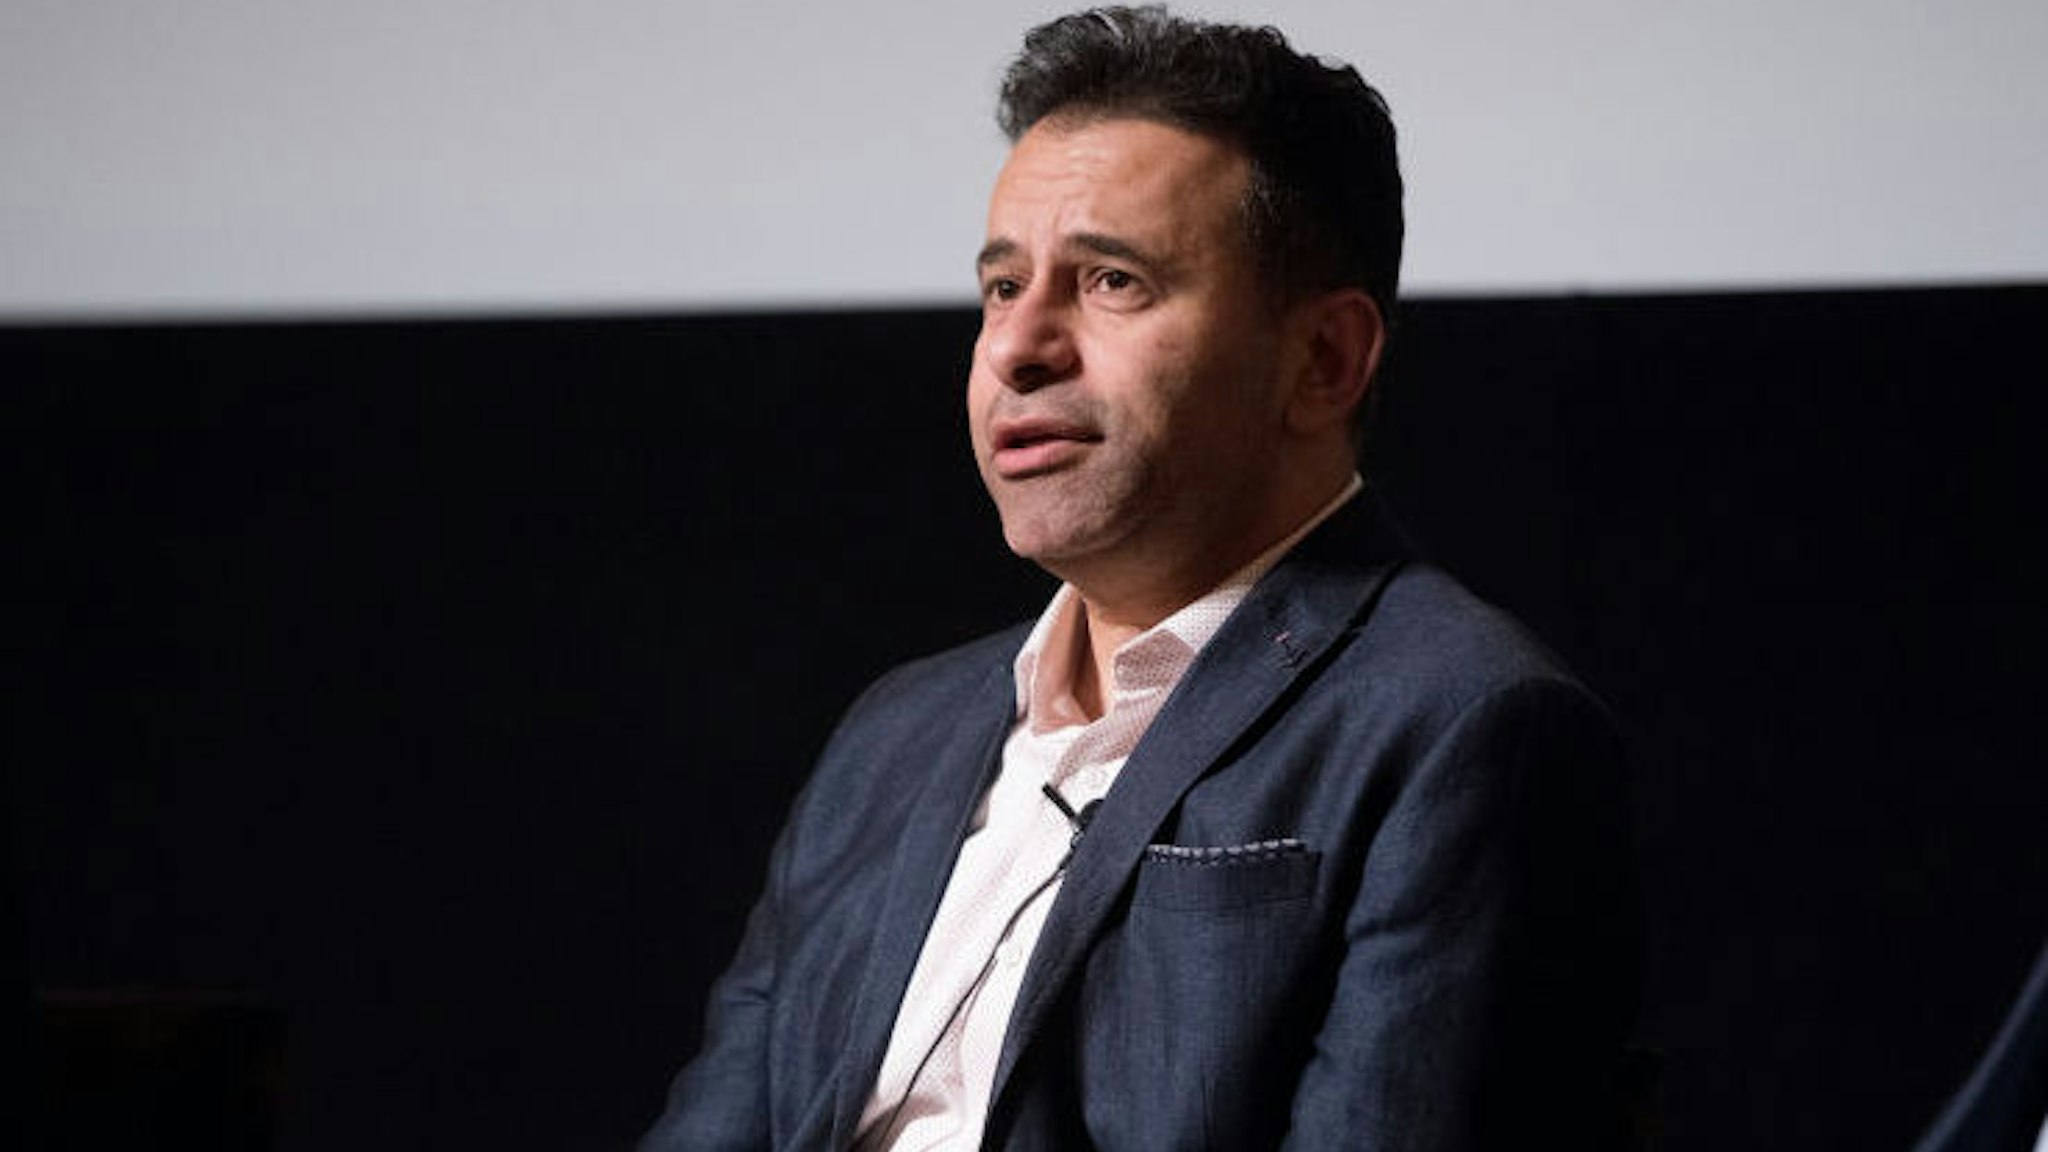 Dr. Marty Makary speaks during a screening of the HBO documentary film 'Bleed Out' on December 12, 2018 in New York City.